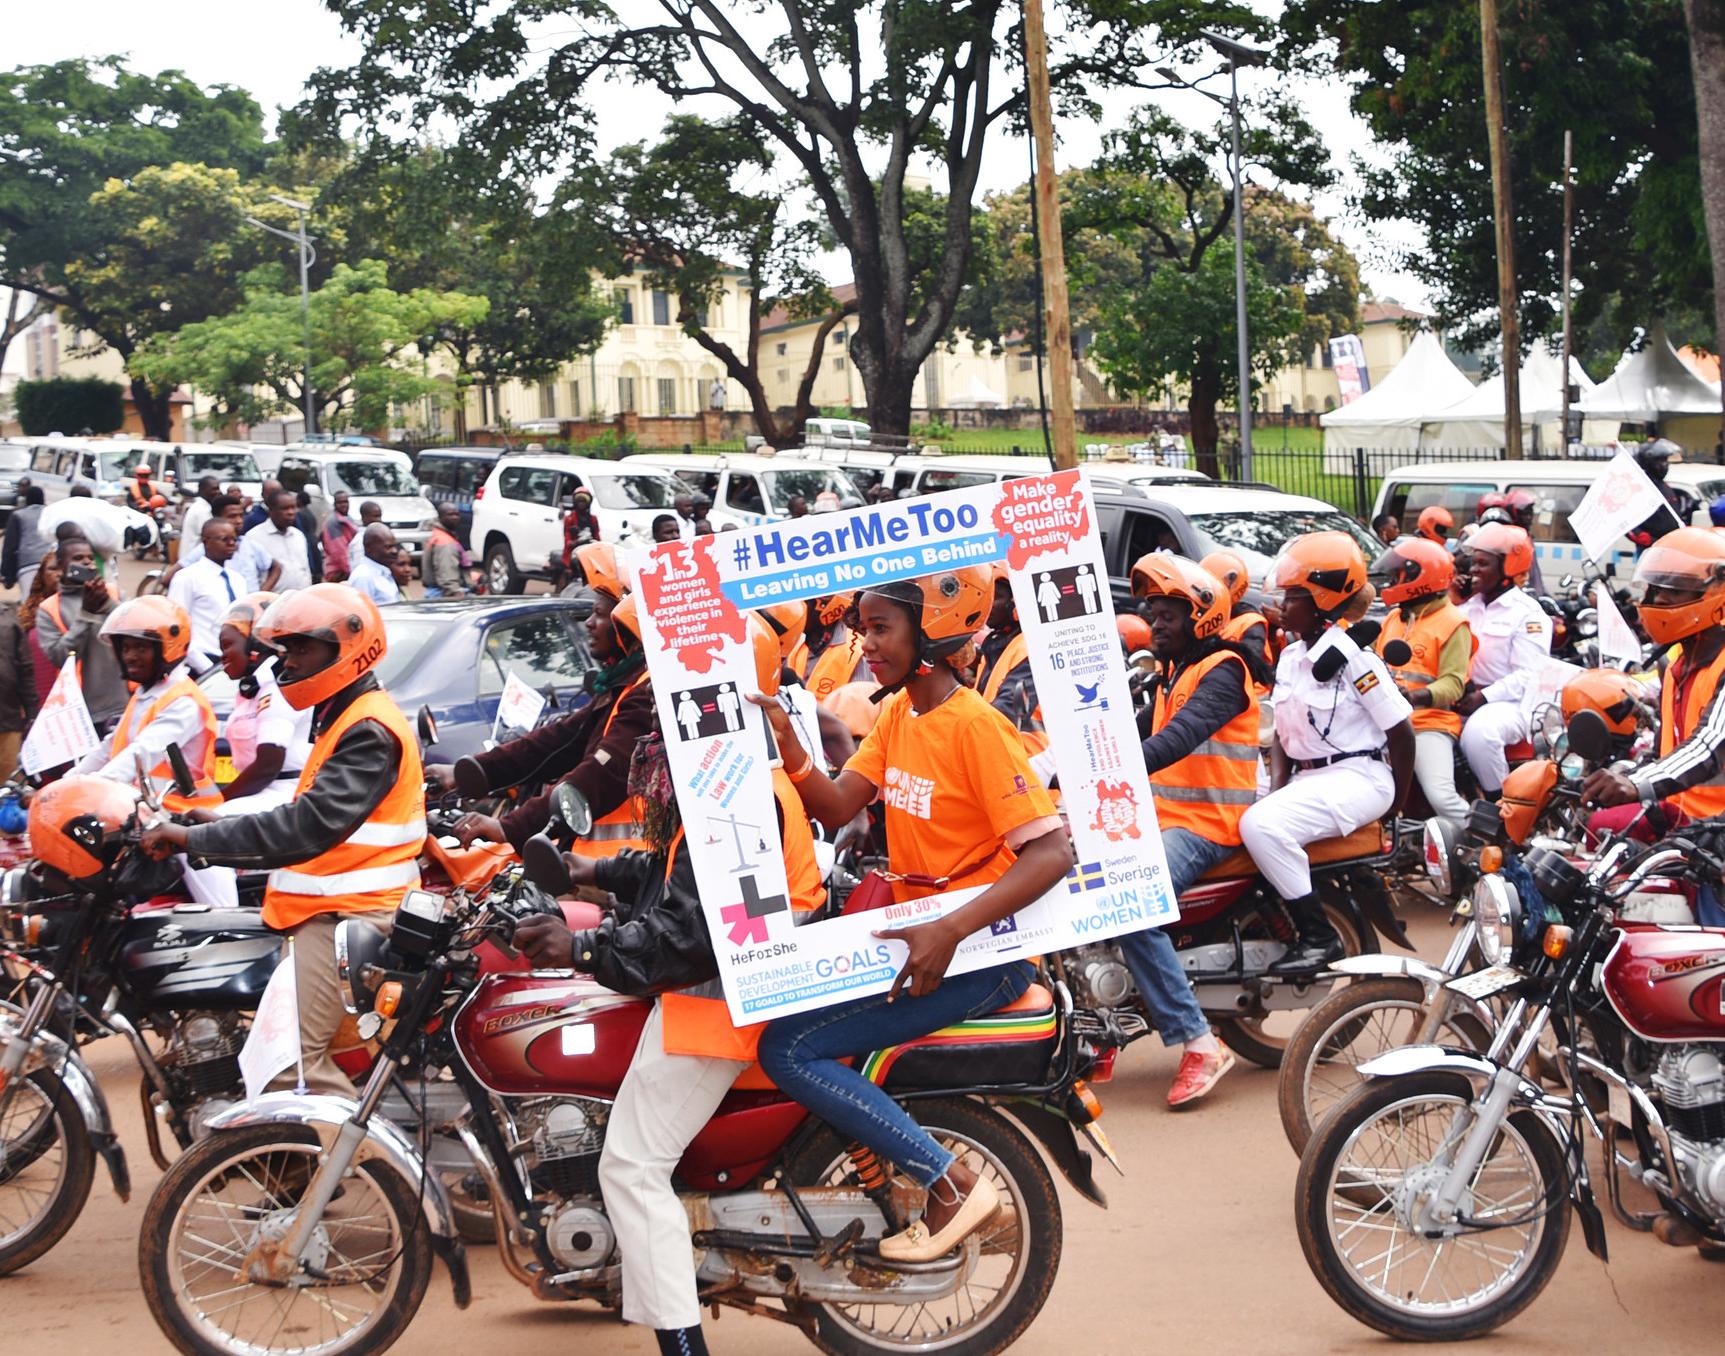 People in Uganda commemorate the 16 Days of Activism against Gender-Based Violence with a bike ride. Photo: UN Women/Martin Ninsiima